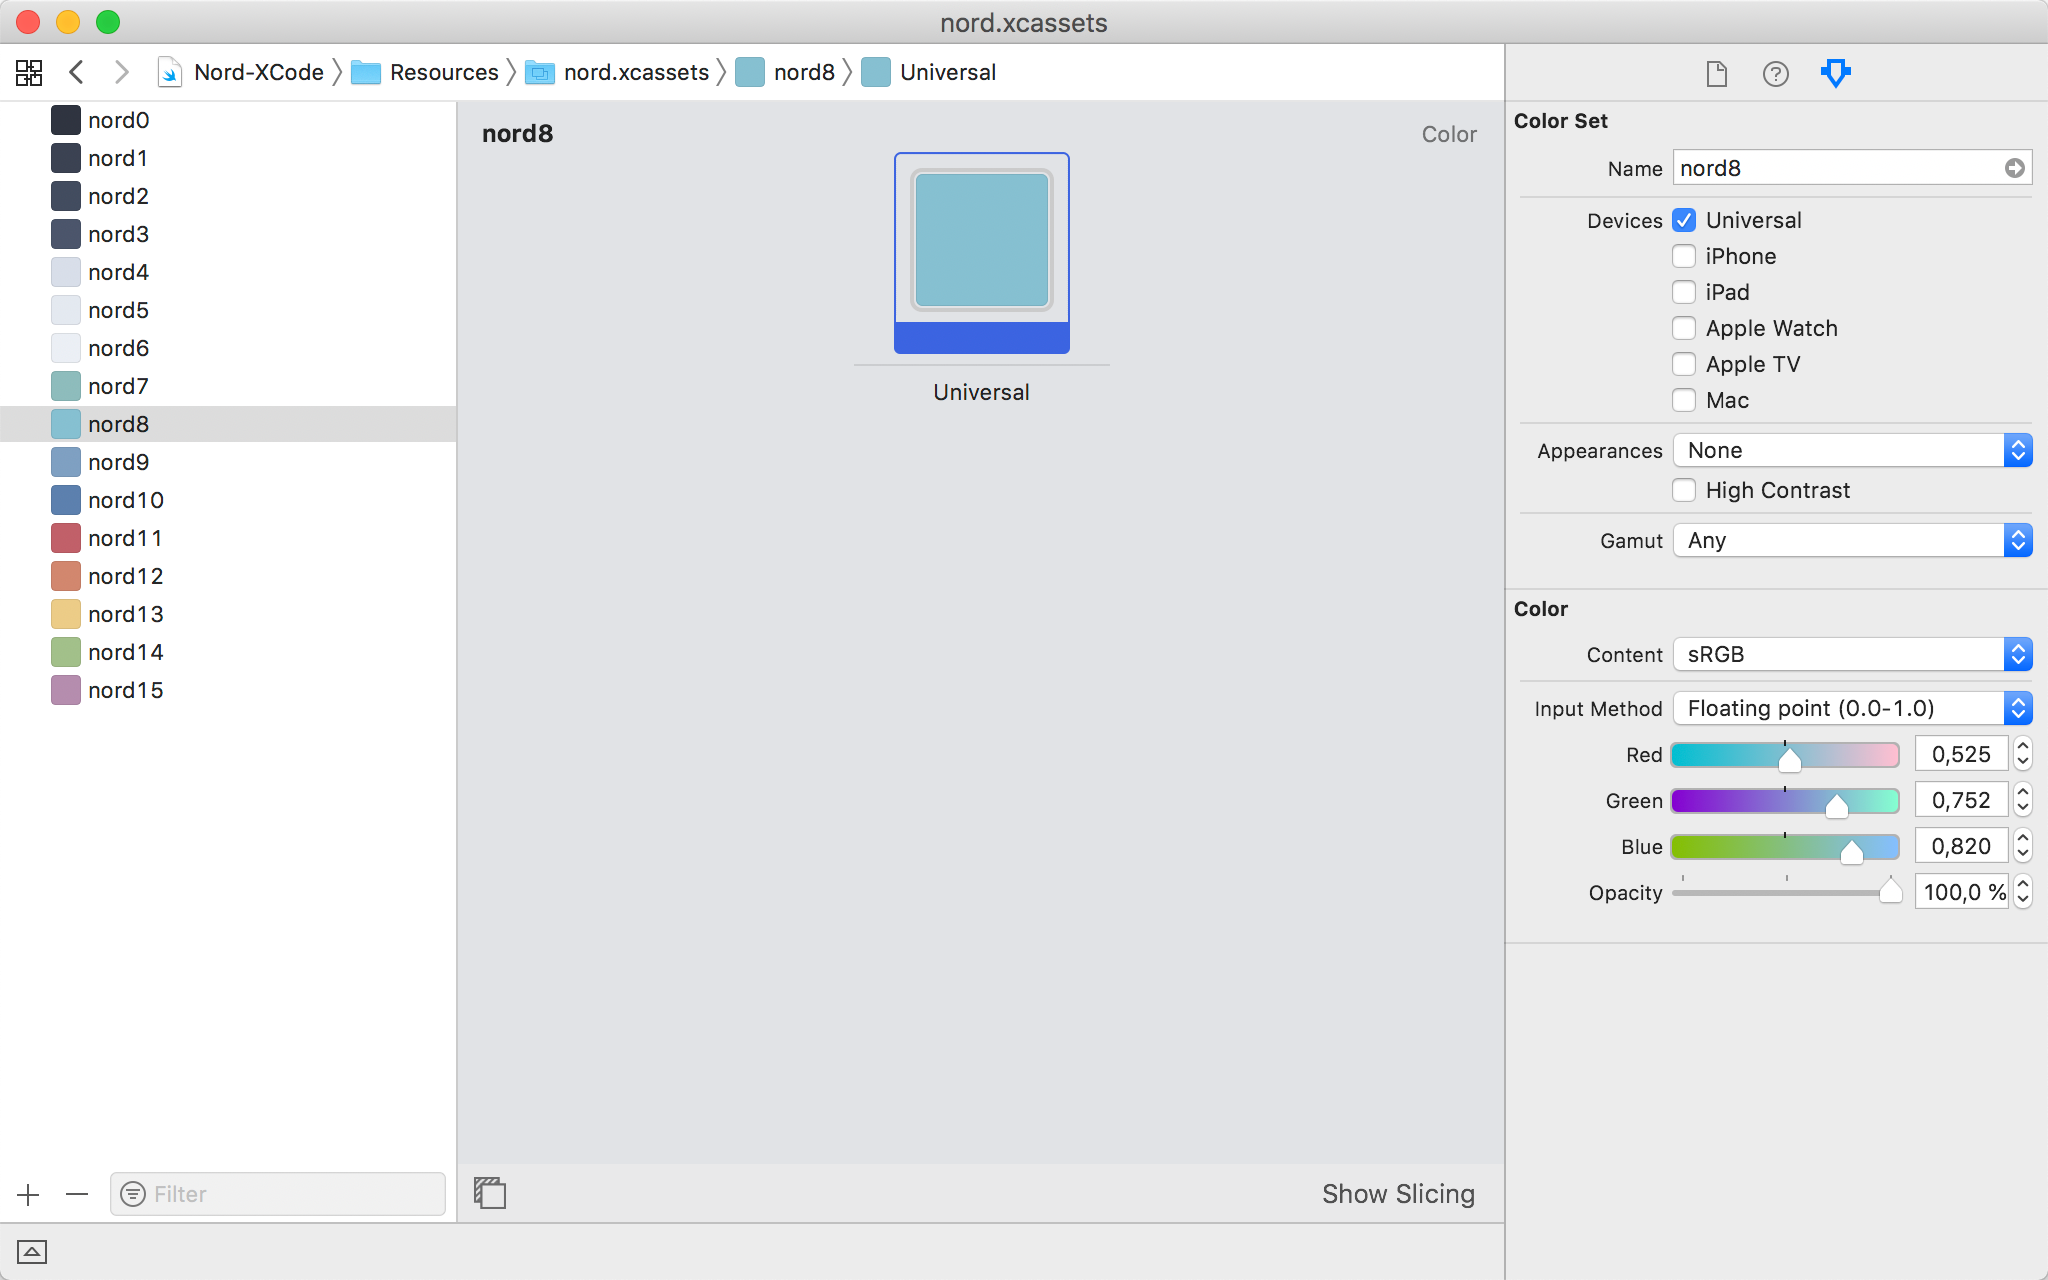 Screenshot showing the Nord color set in the Xcode asset catalog